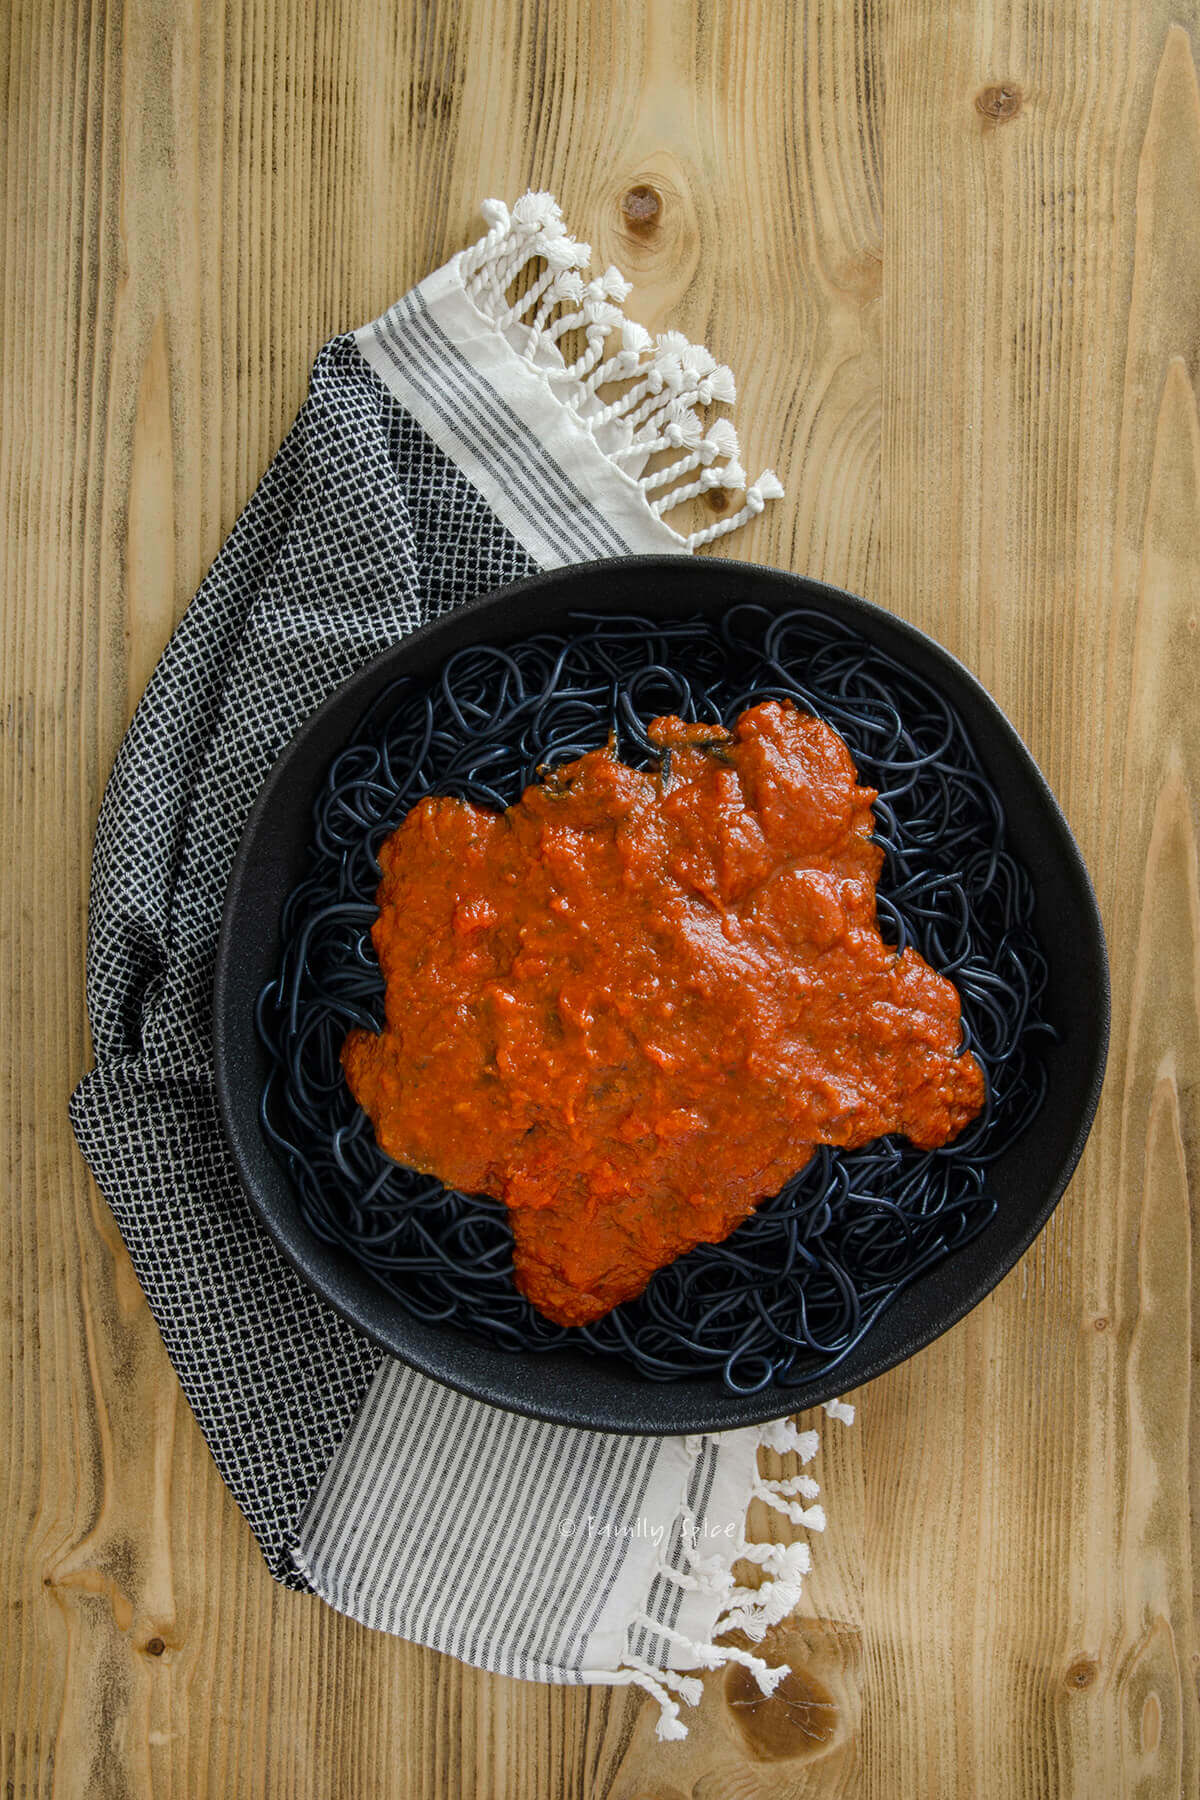 Top view of a black serving bowl with halloween pasta, black spaghetti and marinara